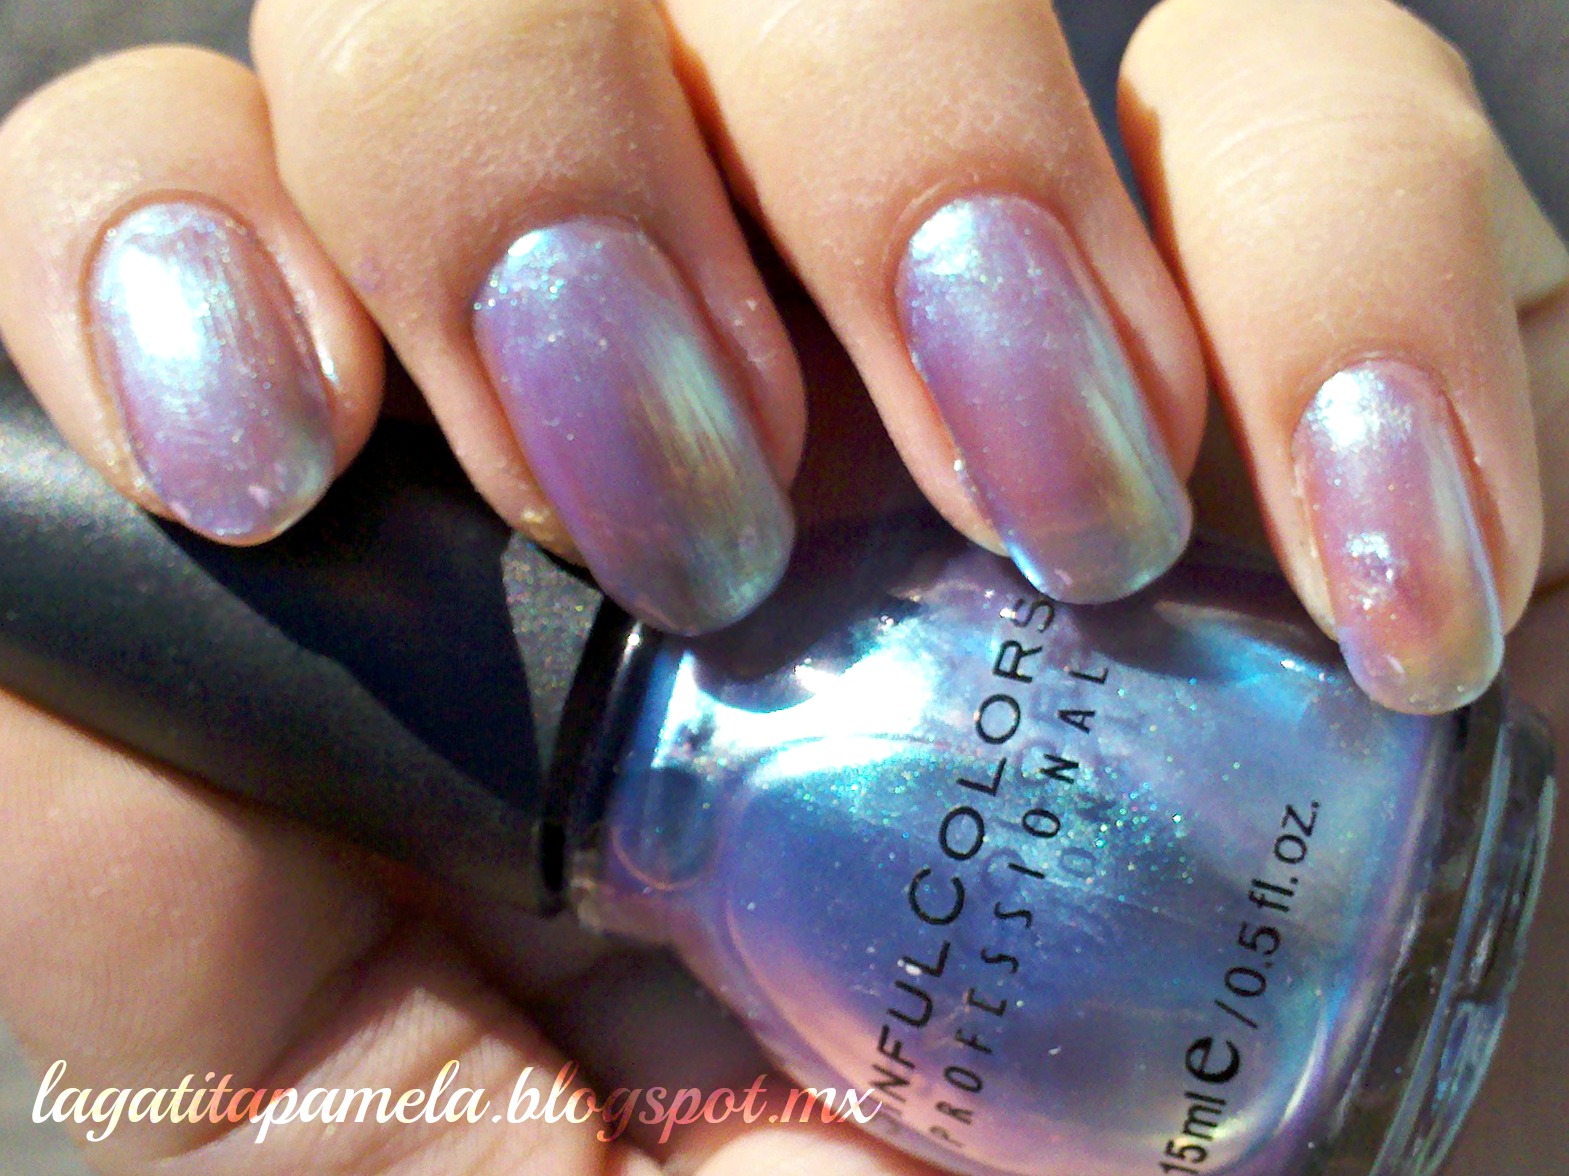 9. Let Me Go Sinful Colors Nail Varnish - wide 7